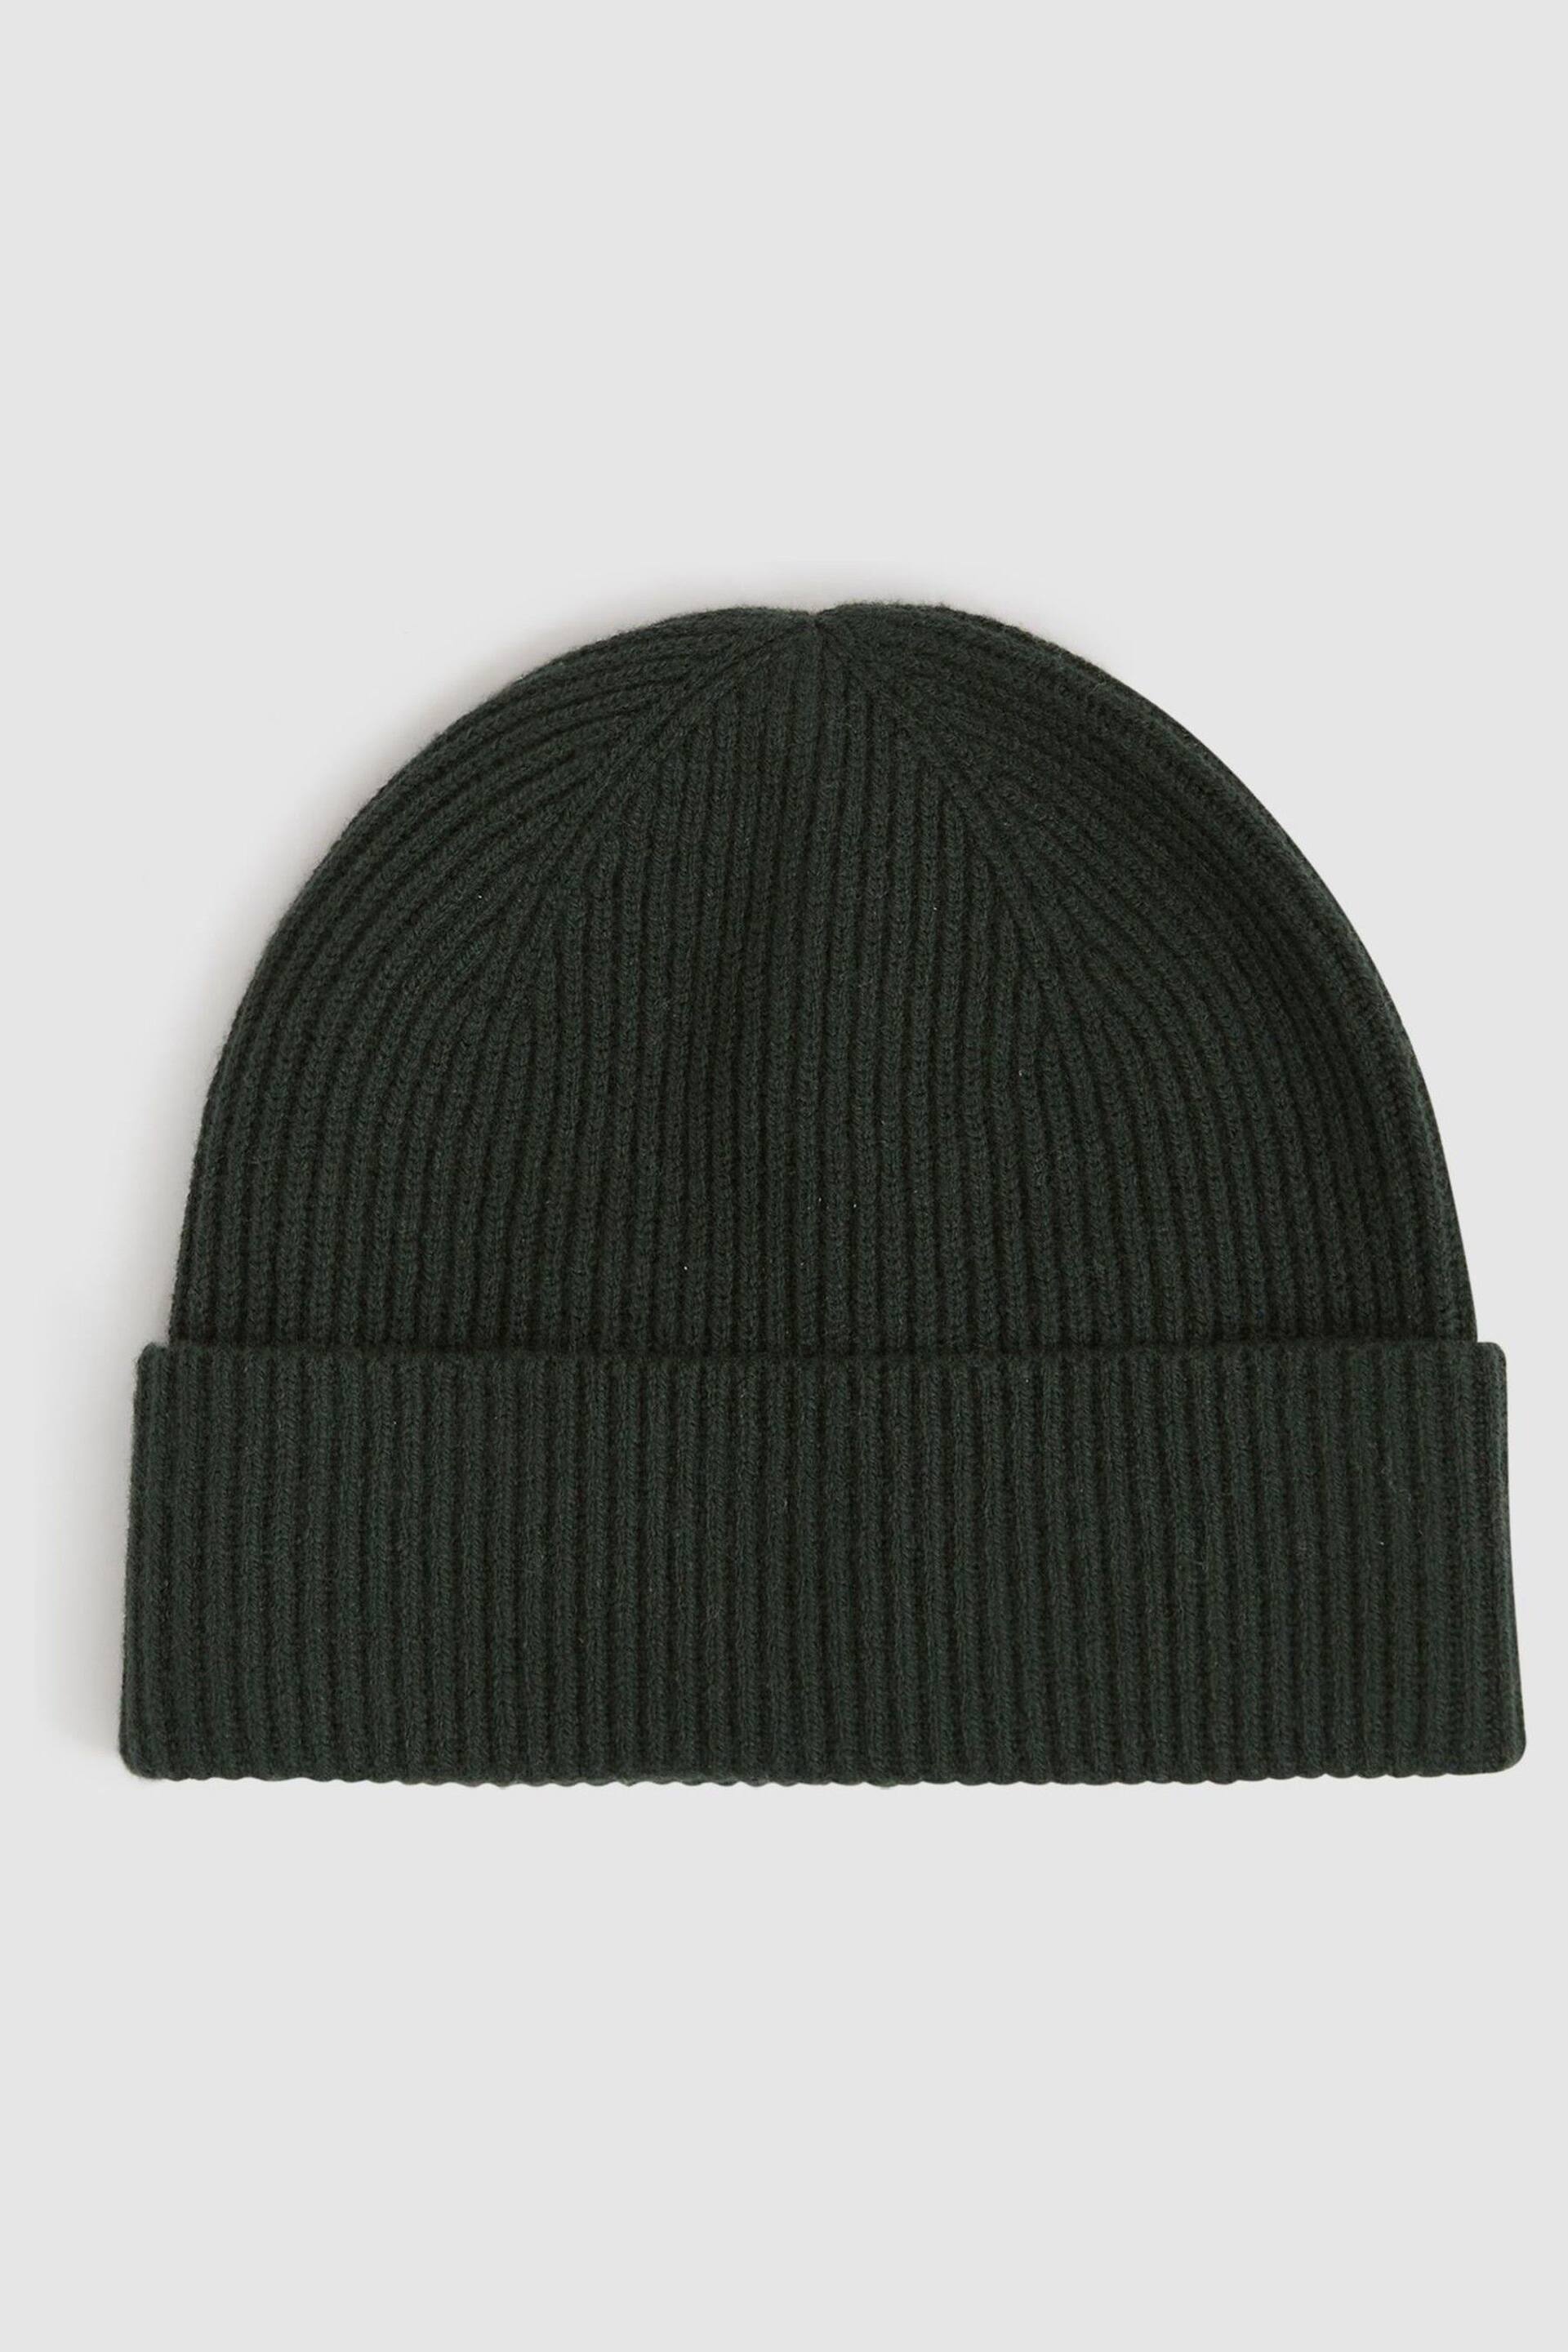 Reiss Forest Green Chaise Merino Wool Ribbed Beanie Hat - Image 1 of 4